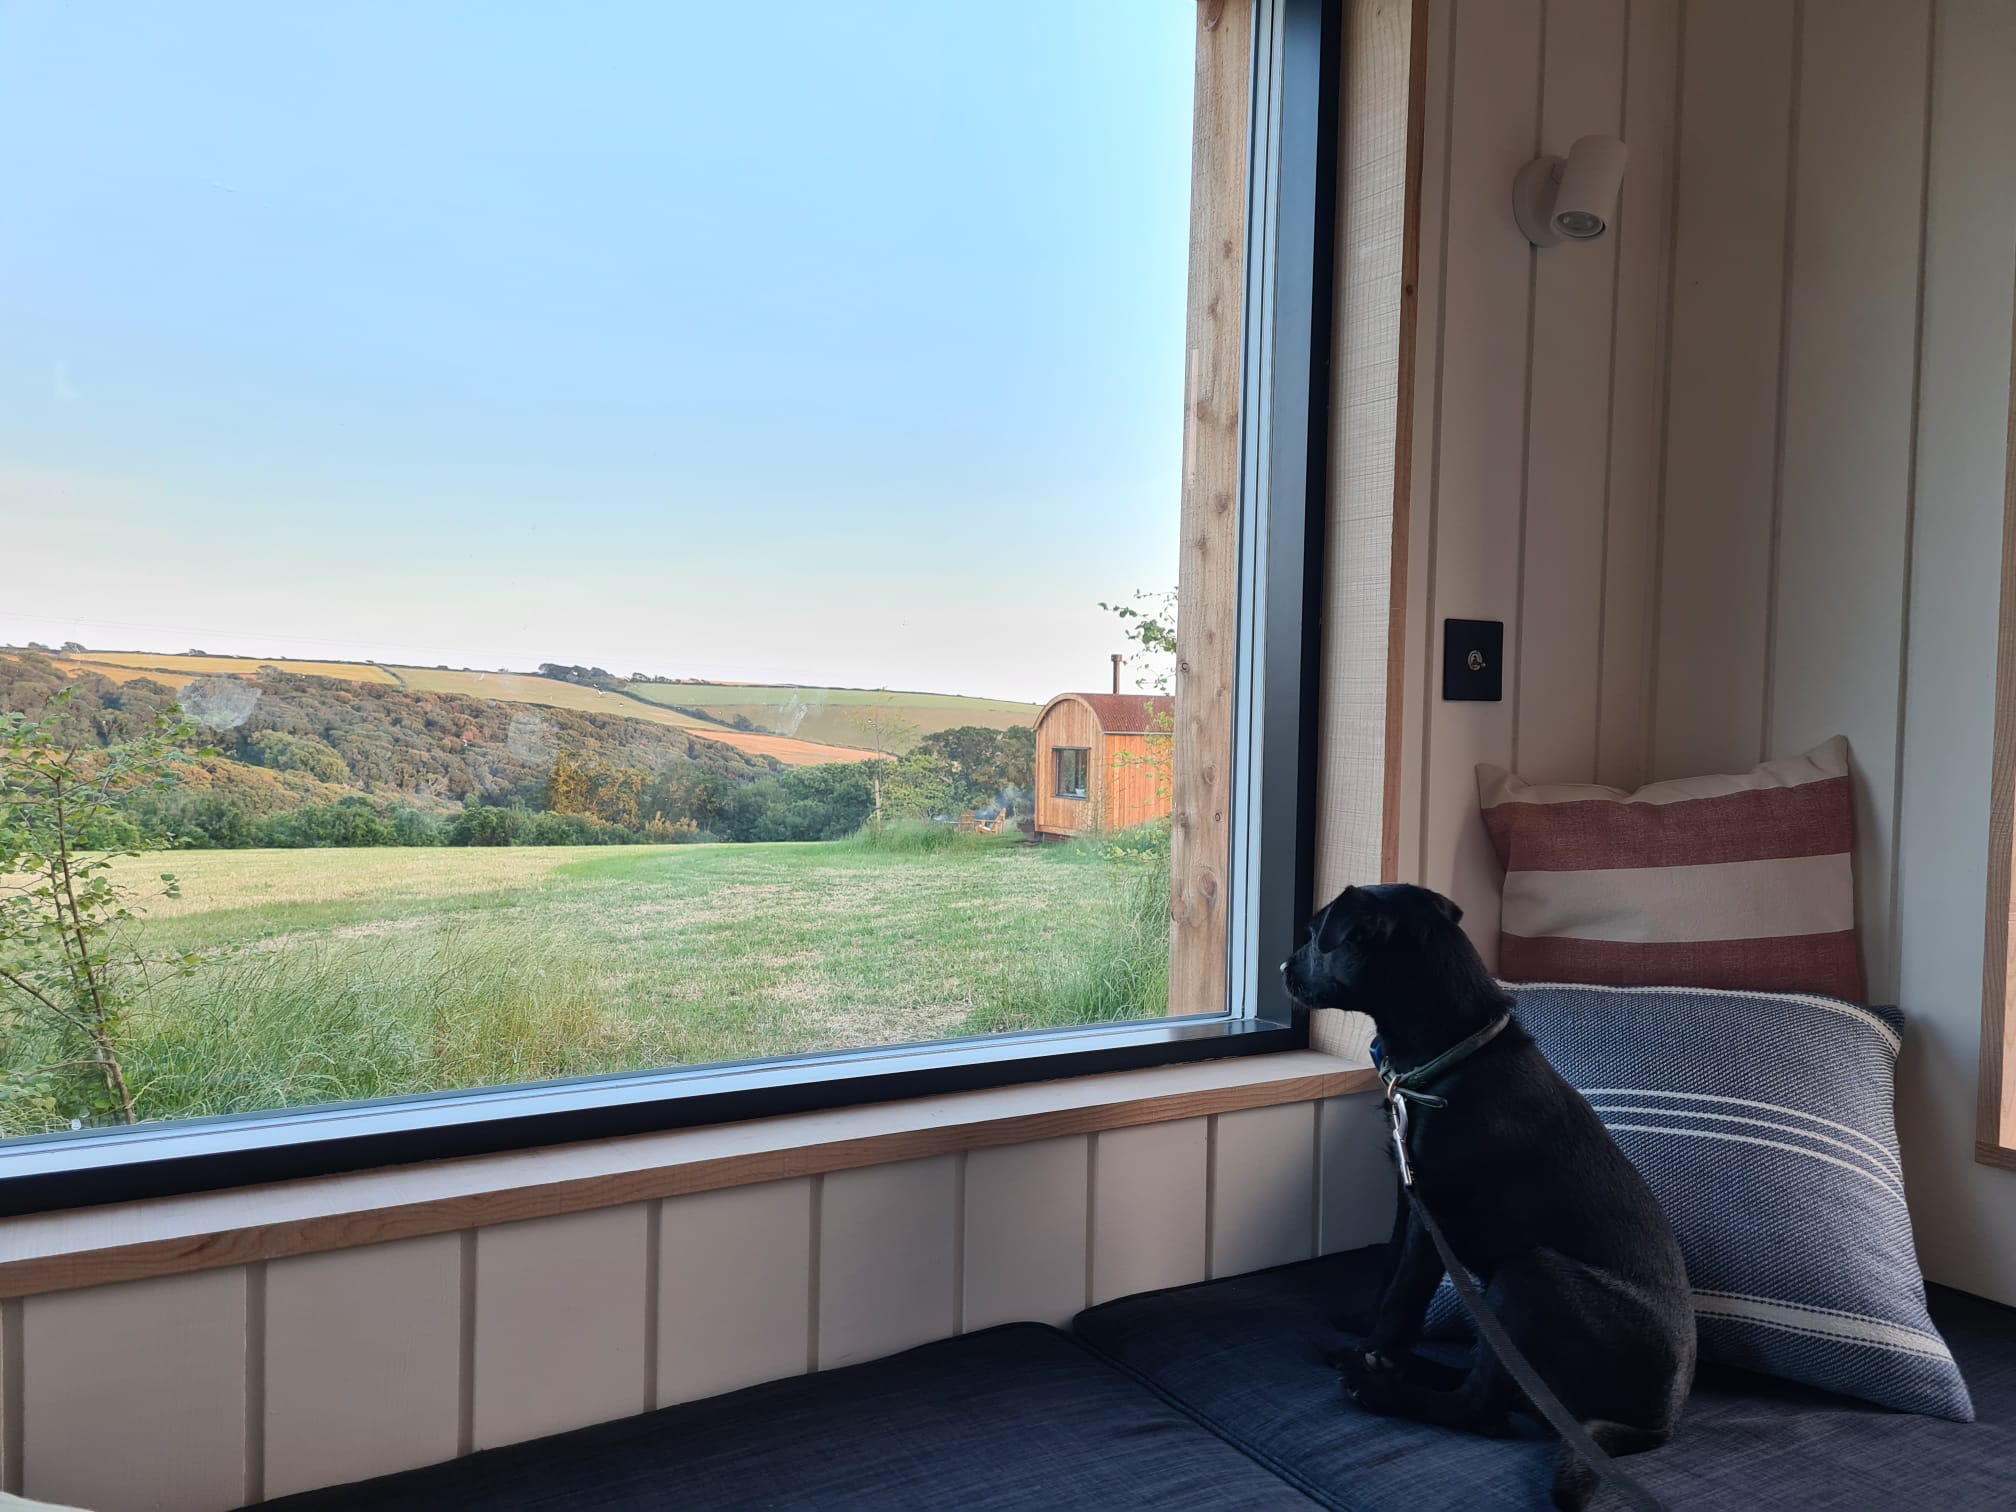 Your dog can stay at Rusty Sheds A luxury holiday rental in south devon.